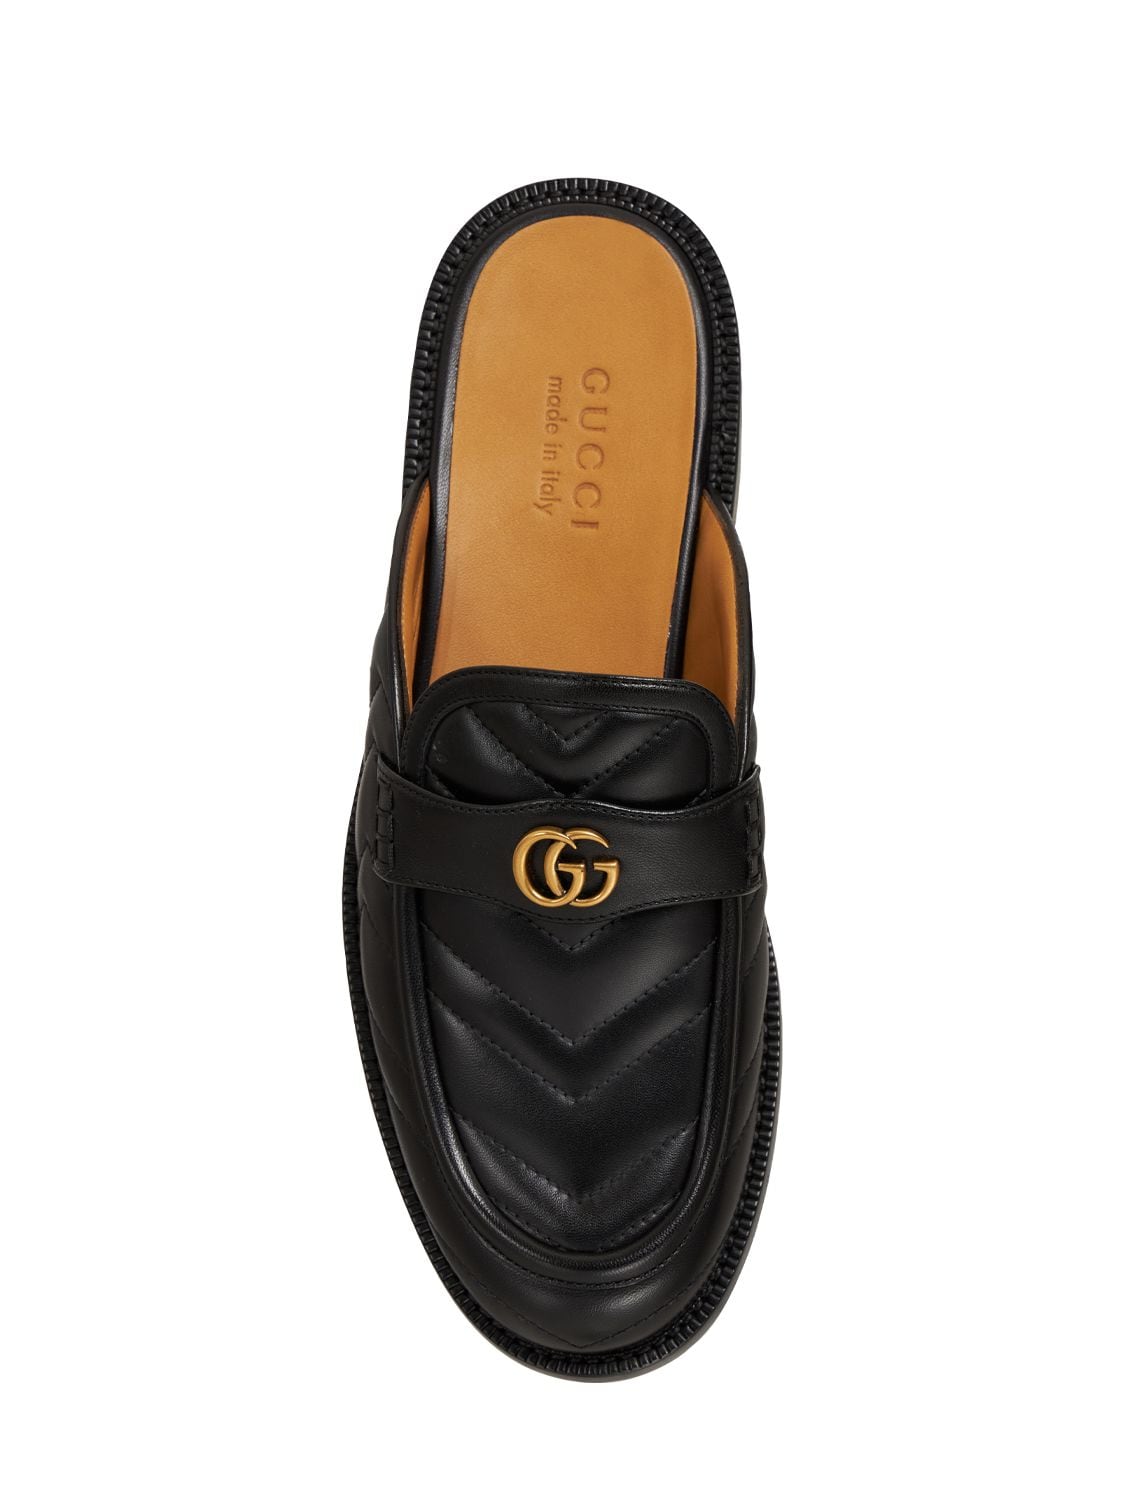 GUCCI - Marmont Logo-Detailed Quilted Leather Backless Loafers - Black Gucci